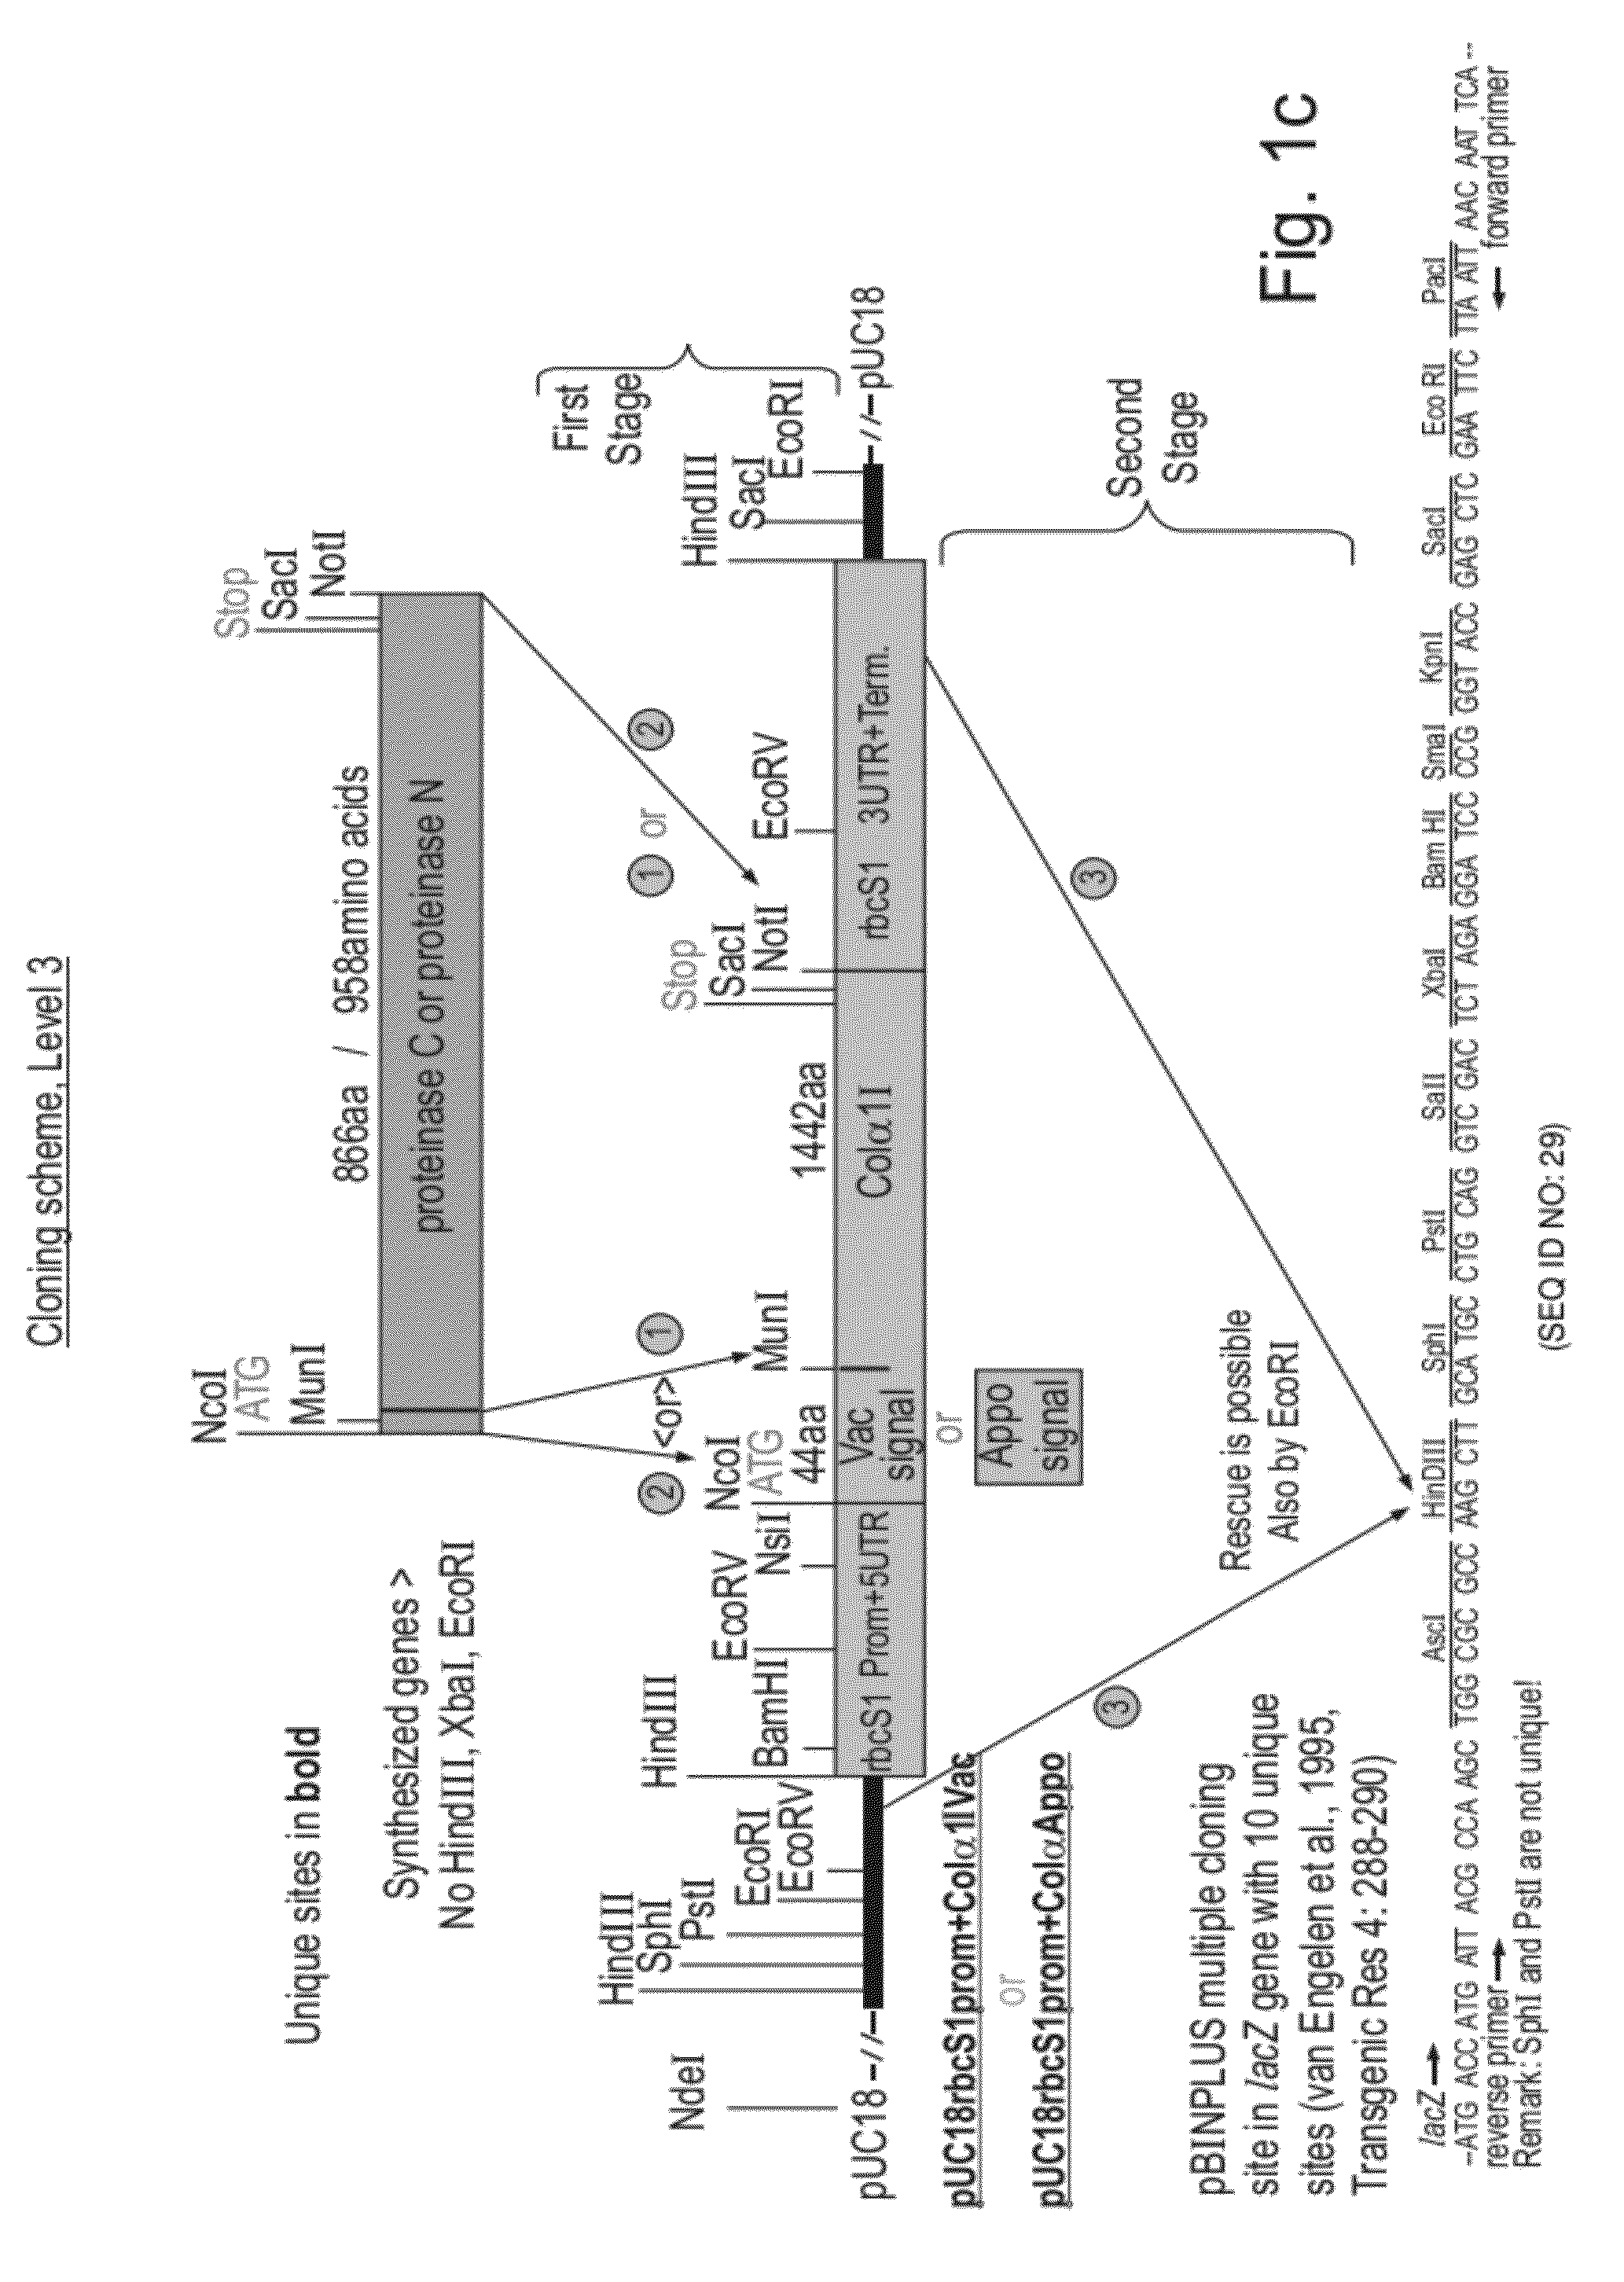 Collagen producing plants and methods of generating and using same